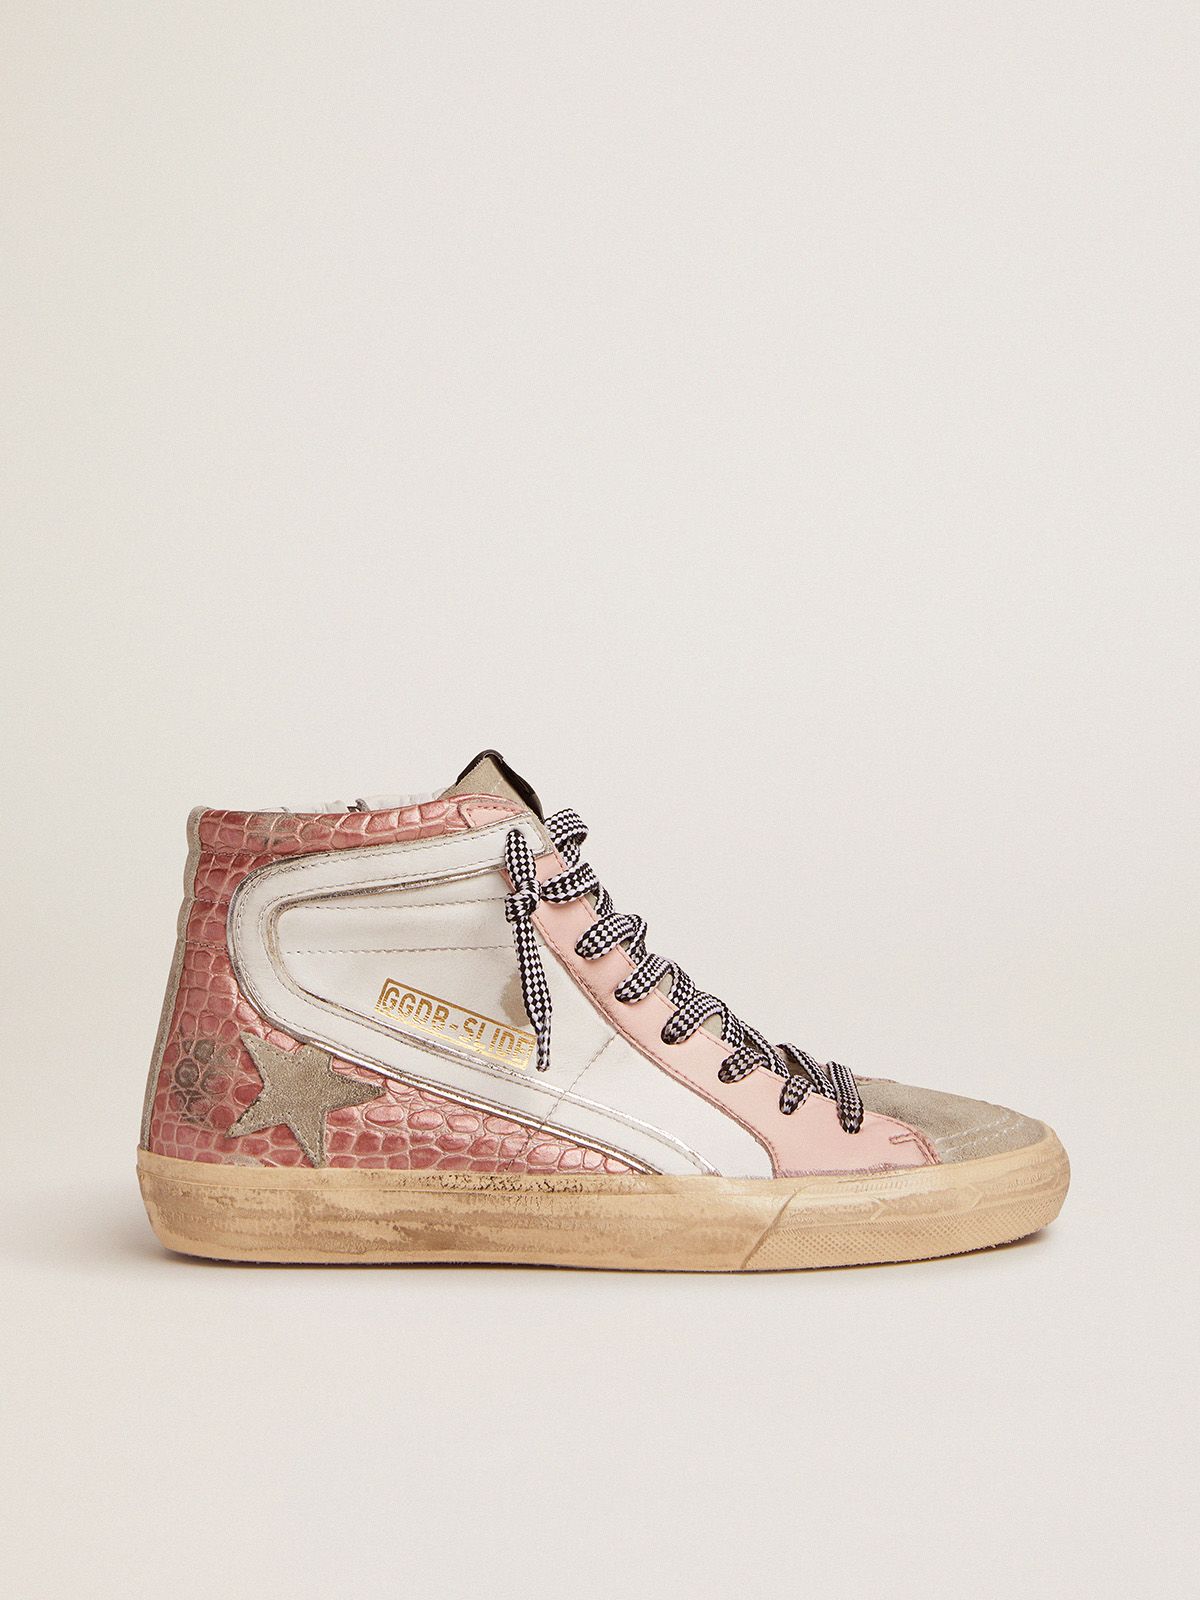 golden goose crocodile-print white leather Slide pink and with upper sneakers